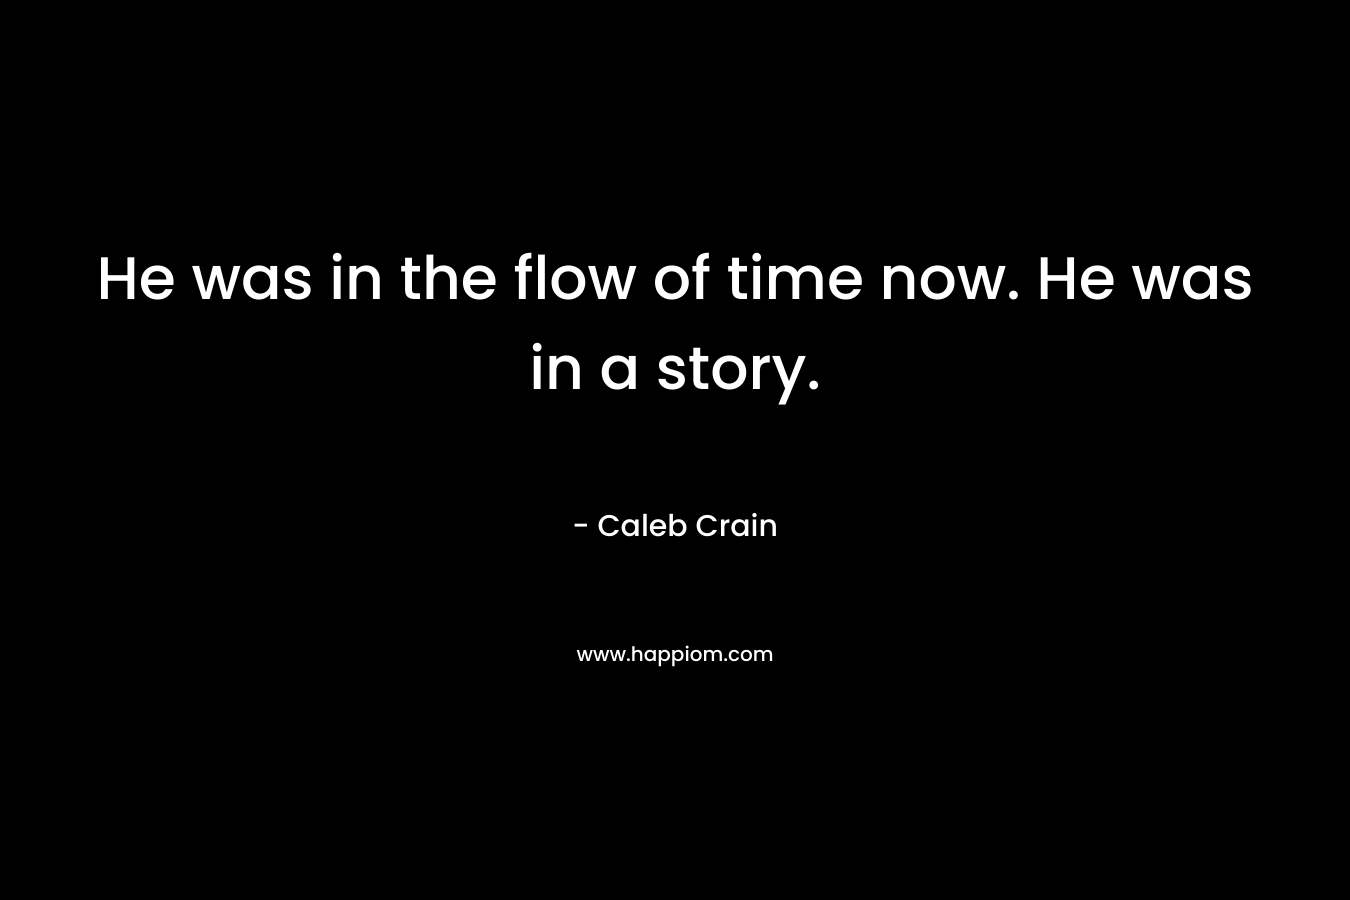 He was in the flow of time now. He was in a story.